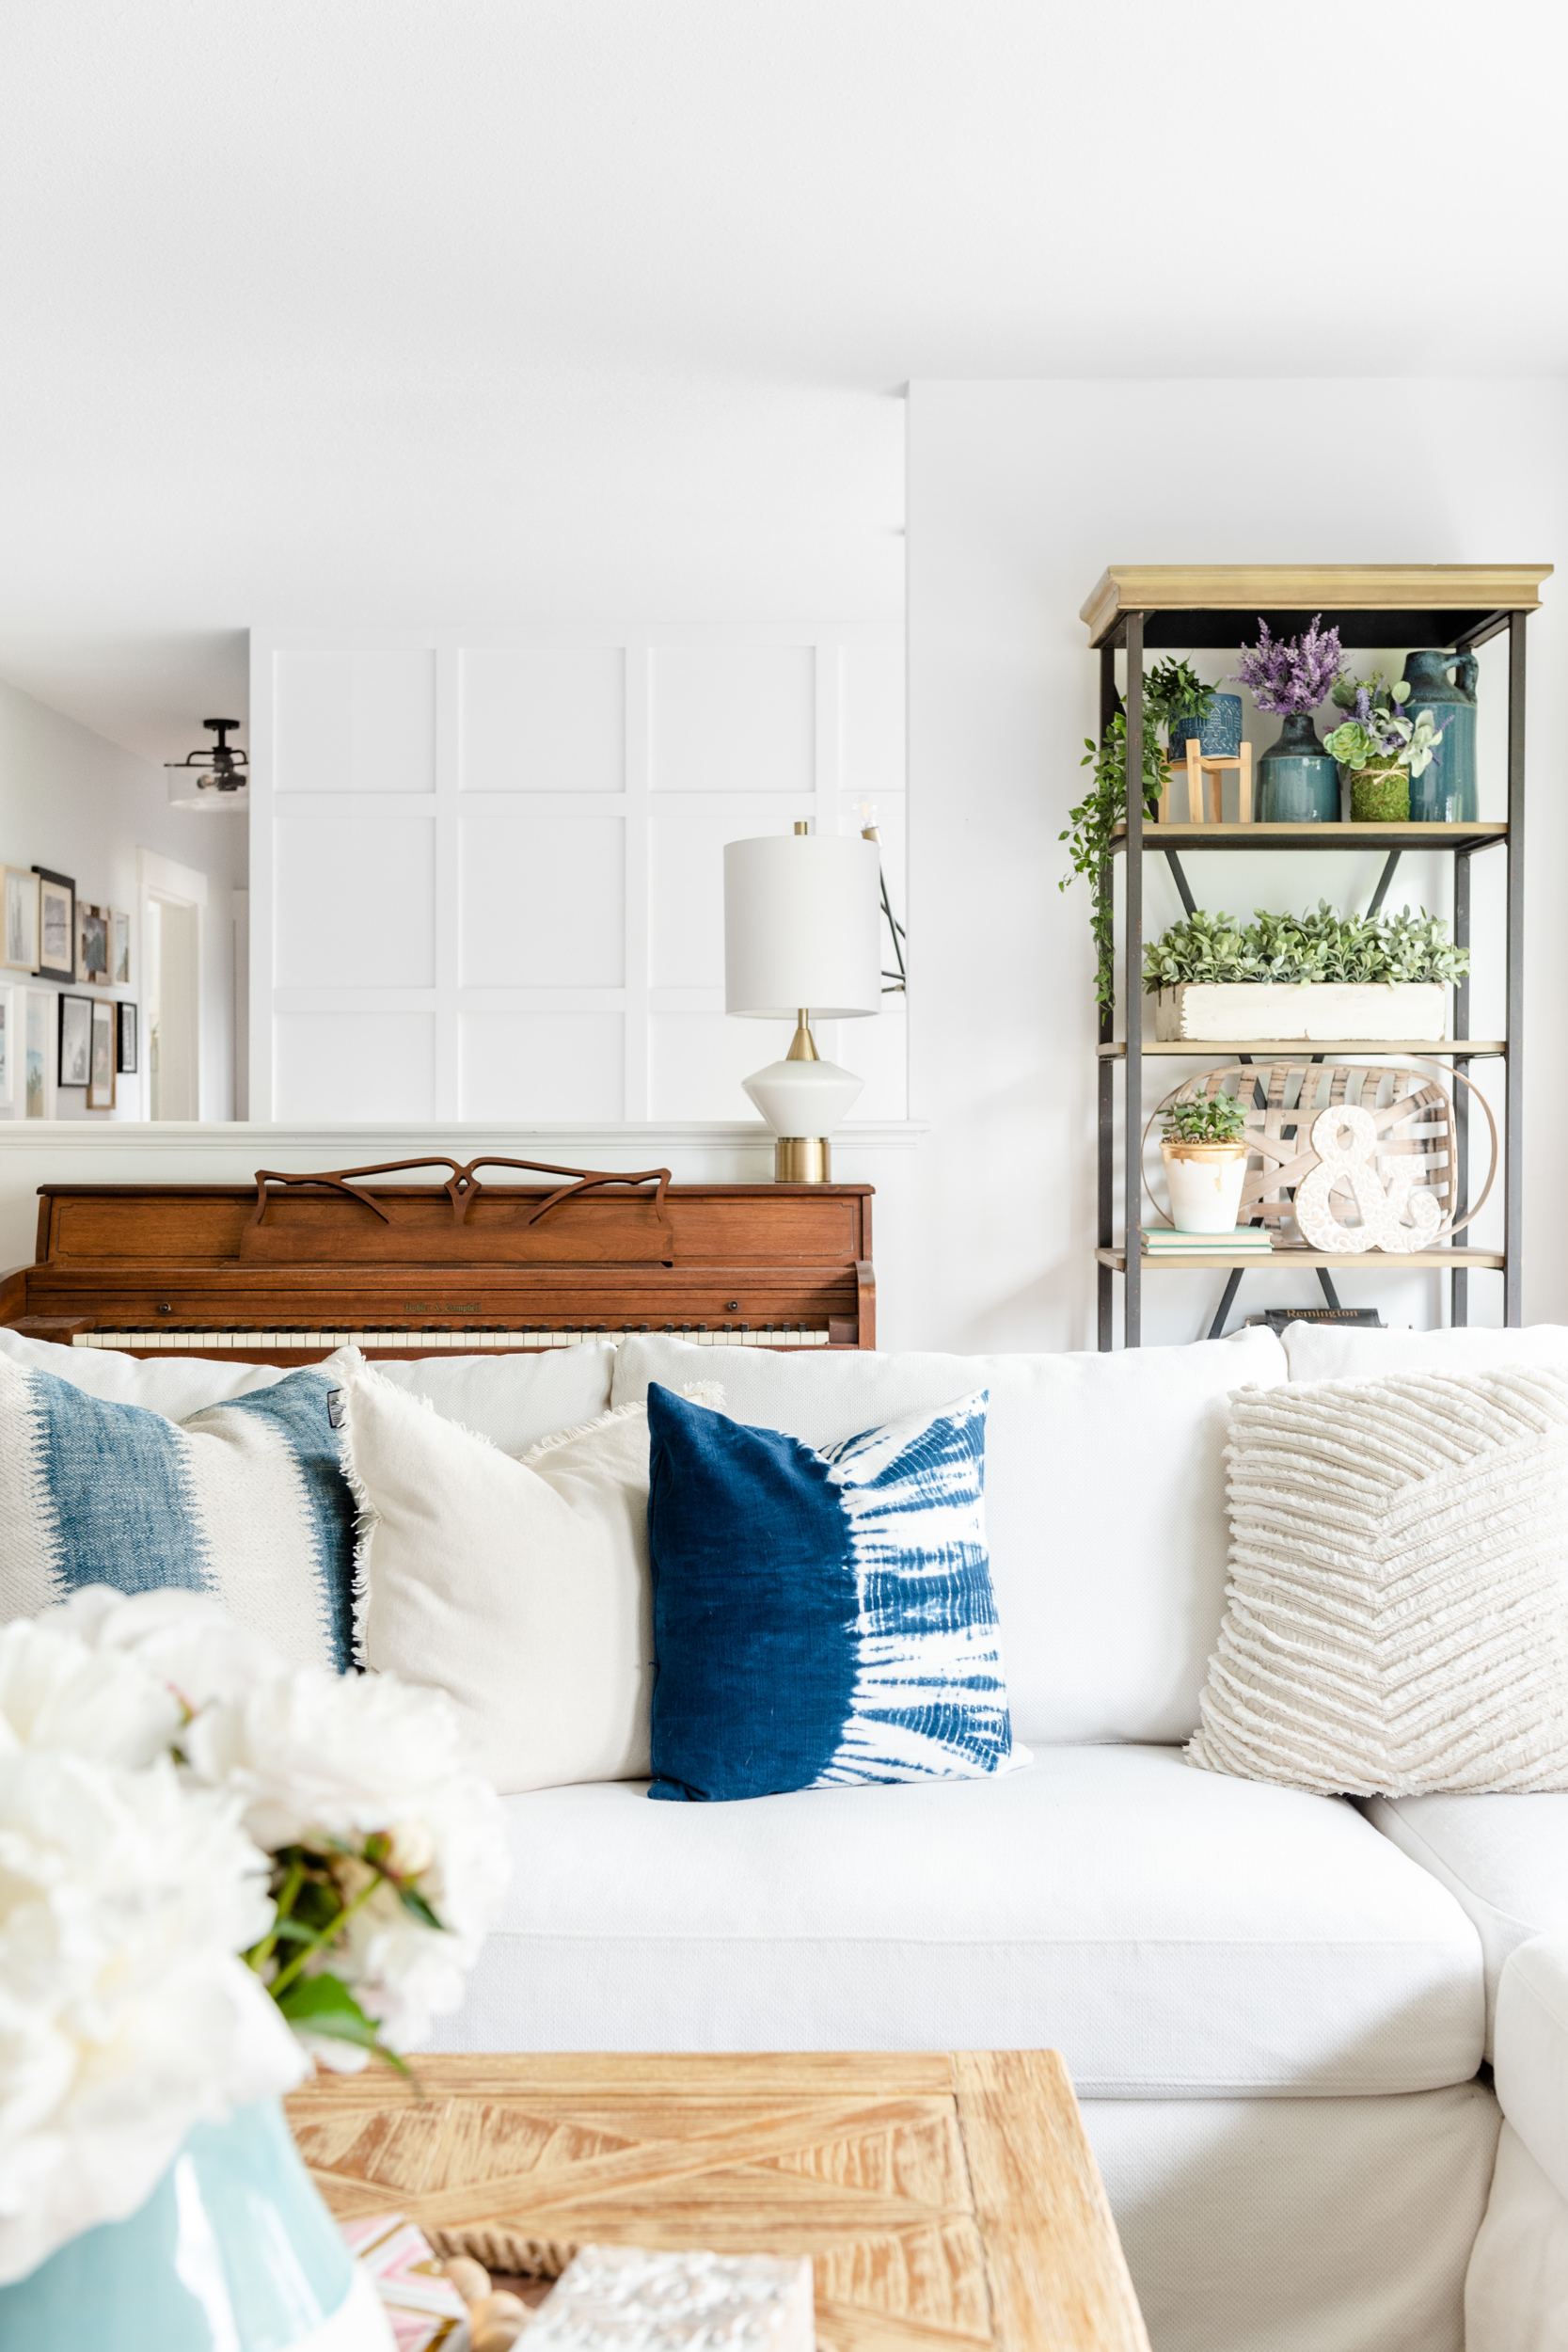 A white and bright living room with a panelled wall in the background and an Ikea Farlov sofa with blue and white pillows